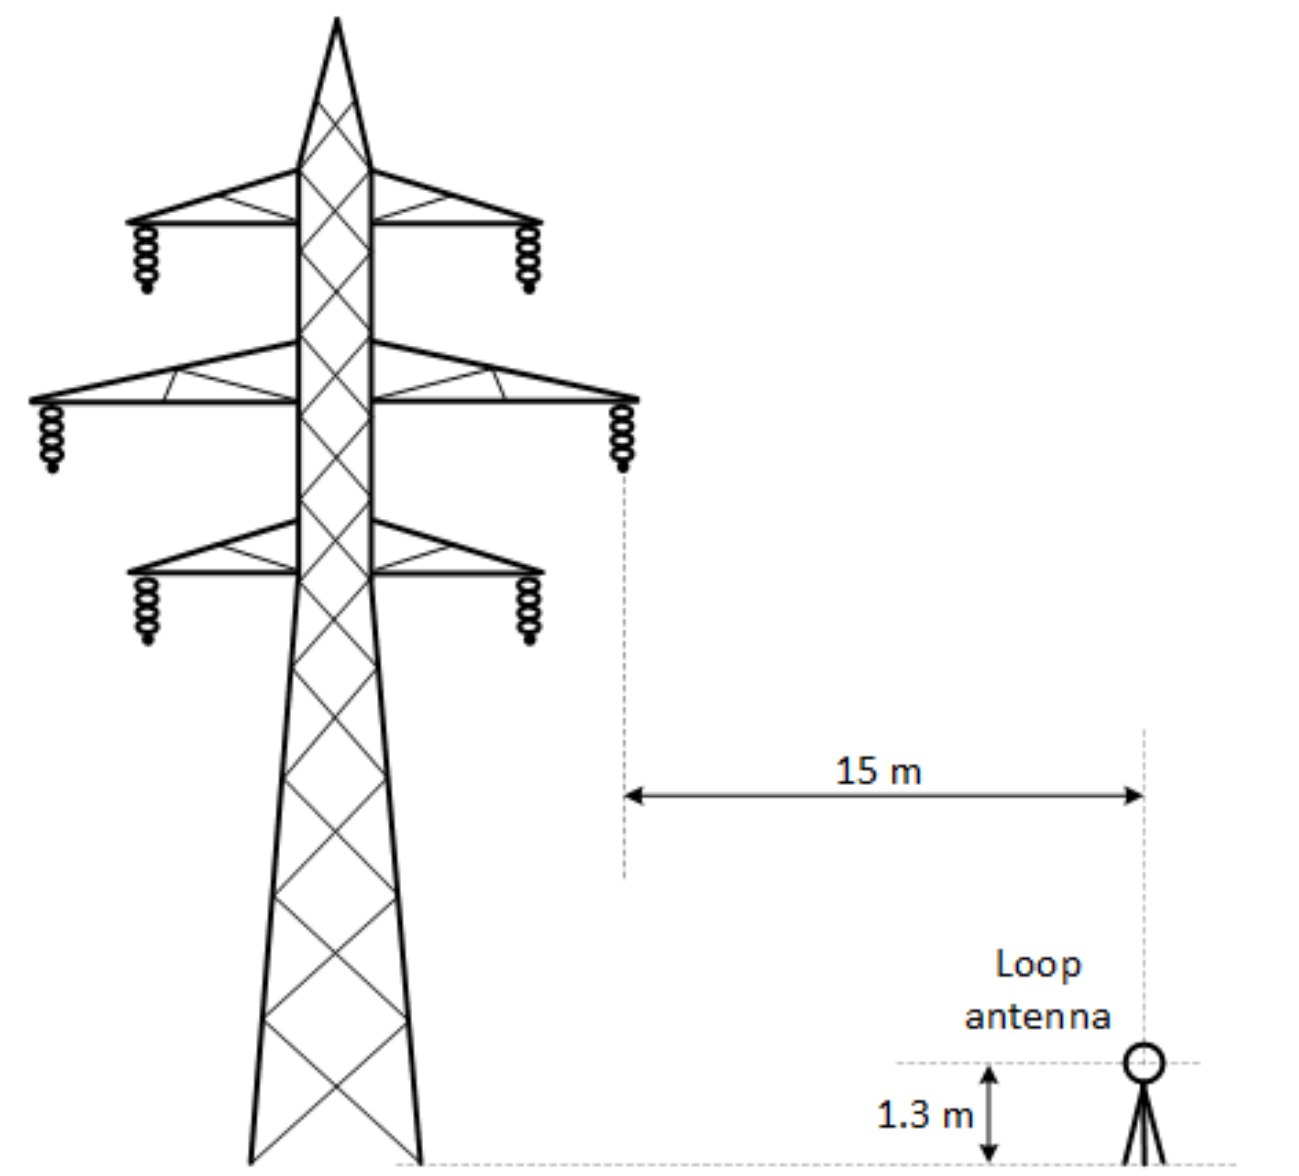 Figure C2: Antenna position (transversal view) (the long description is located below the image)